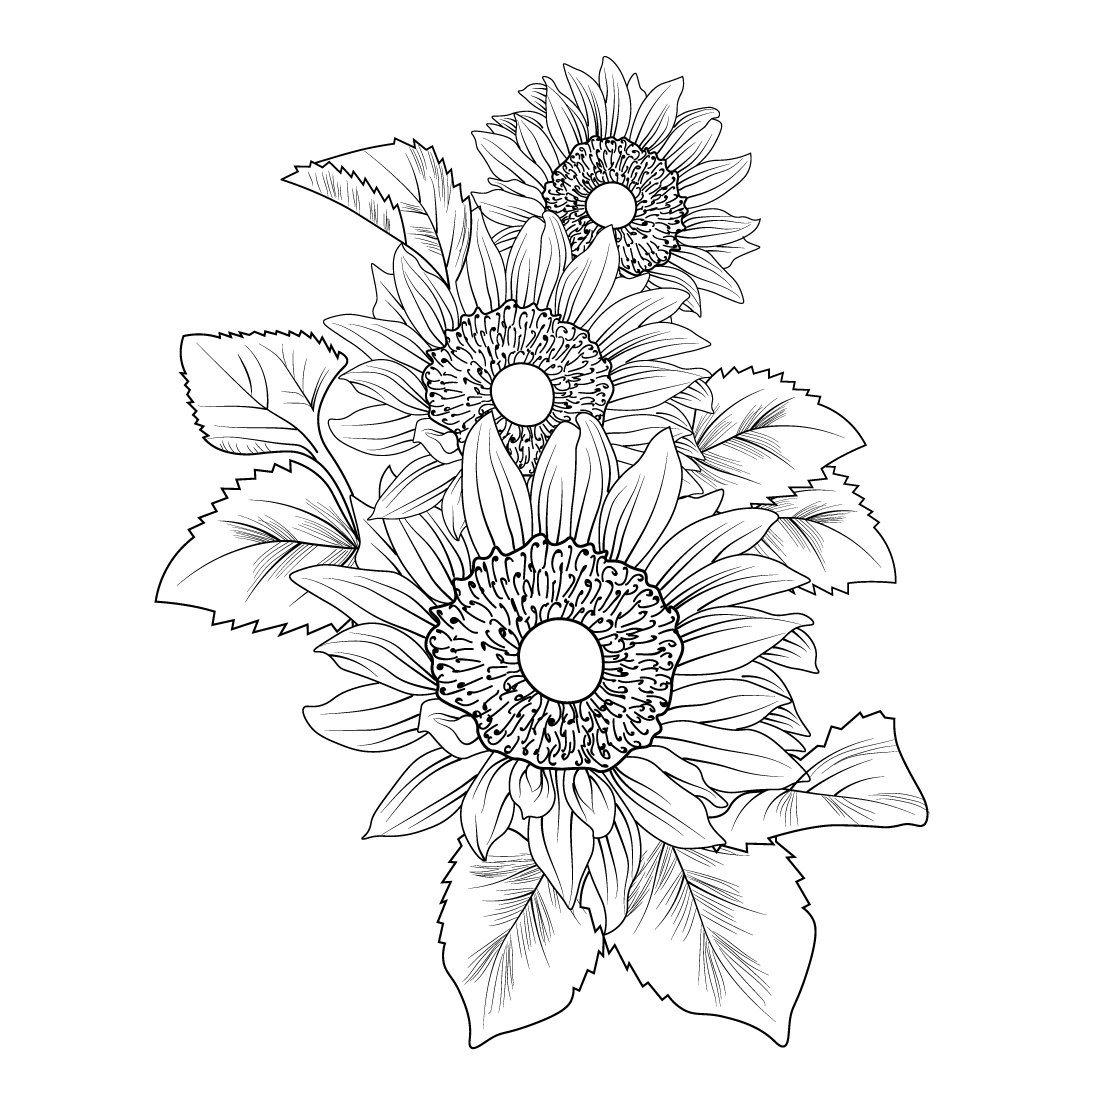 outline sunflower tattoo drawing, line drawing outline sunflower tattoo drawing, stencil sunflower tattoo outline, drawings stencil sunflower tattoo outline, stencil sunflower outline, outline sunflower drawing easy, preview image.